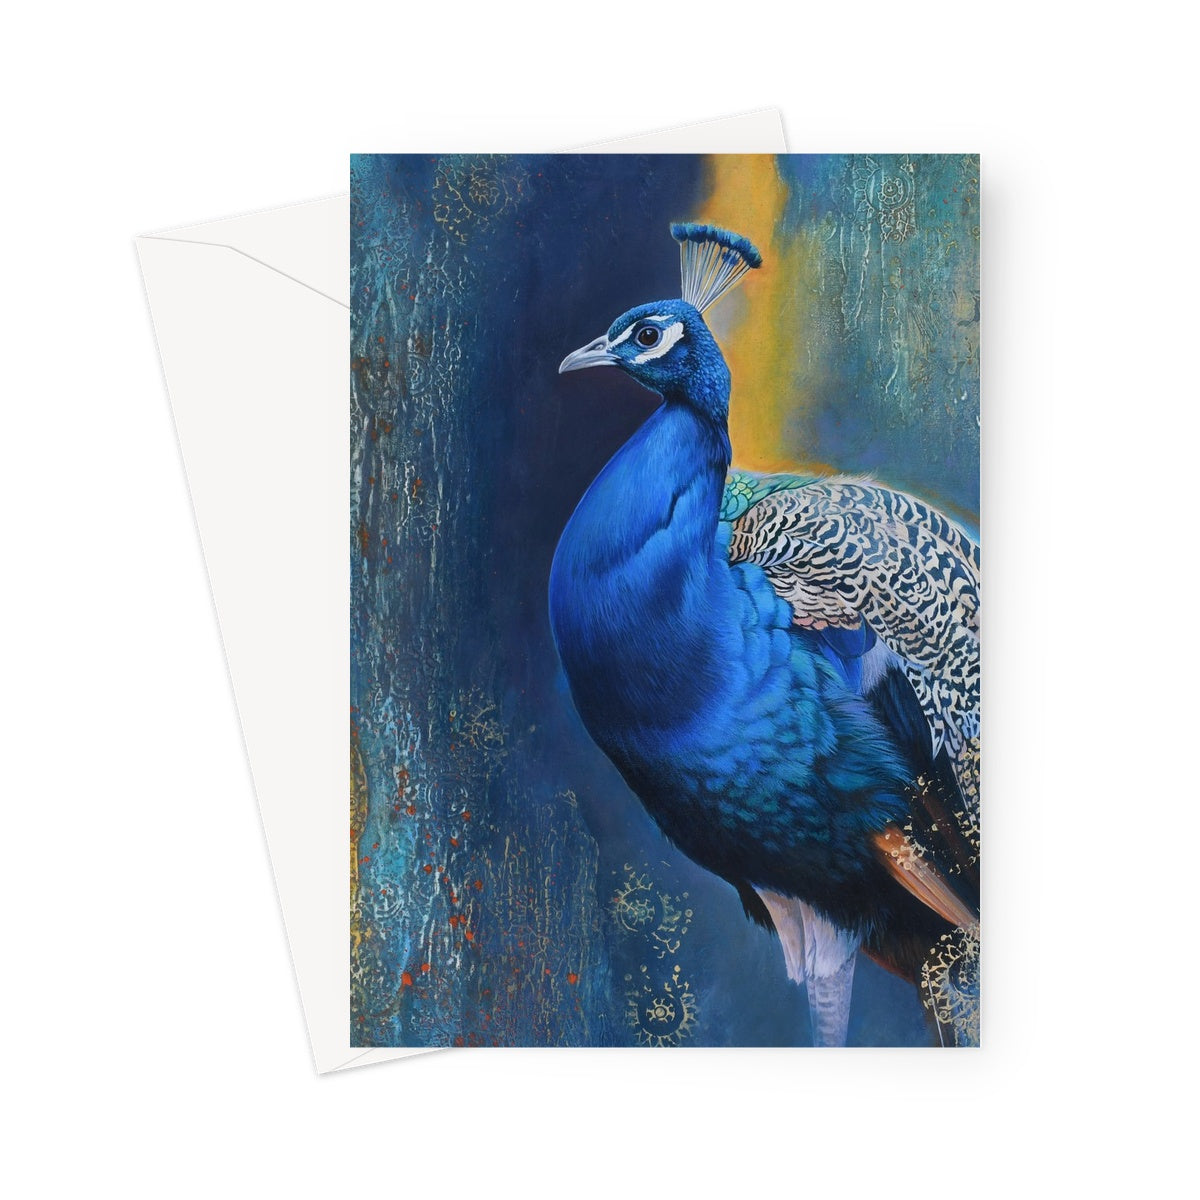 Sapphire on Blue Greeting Card